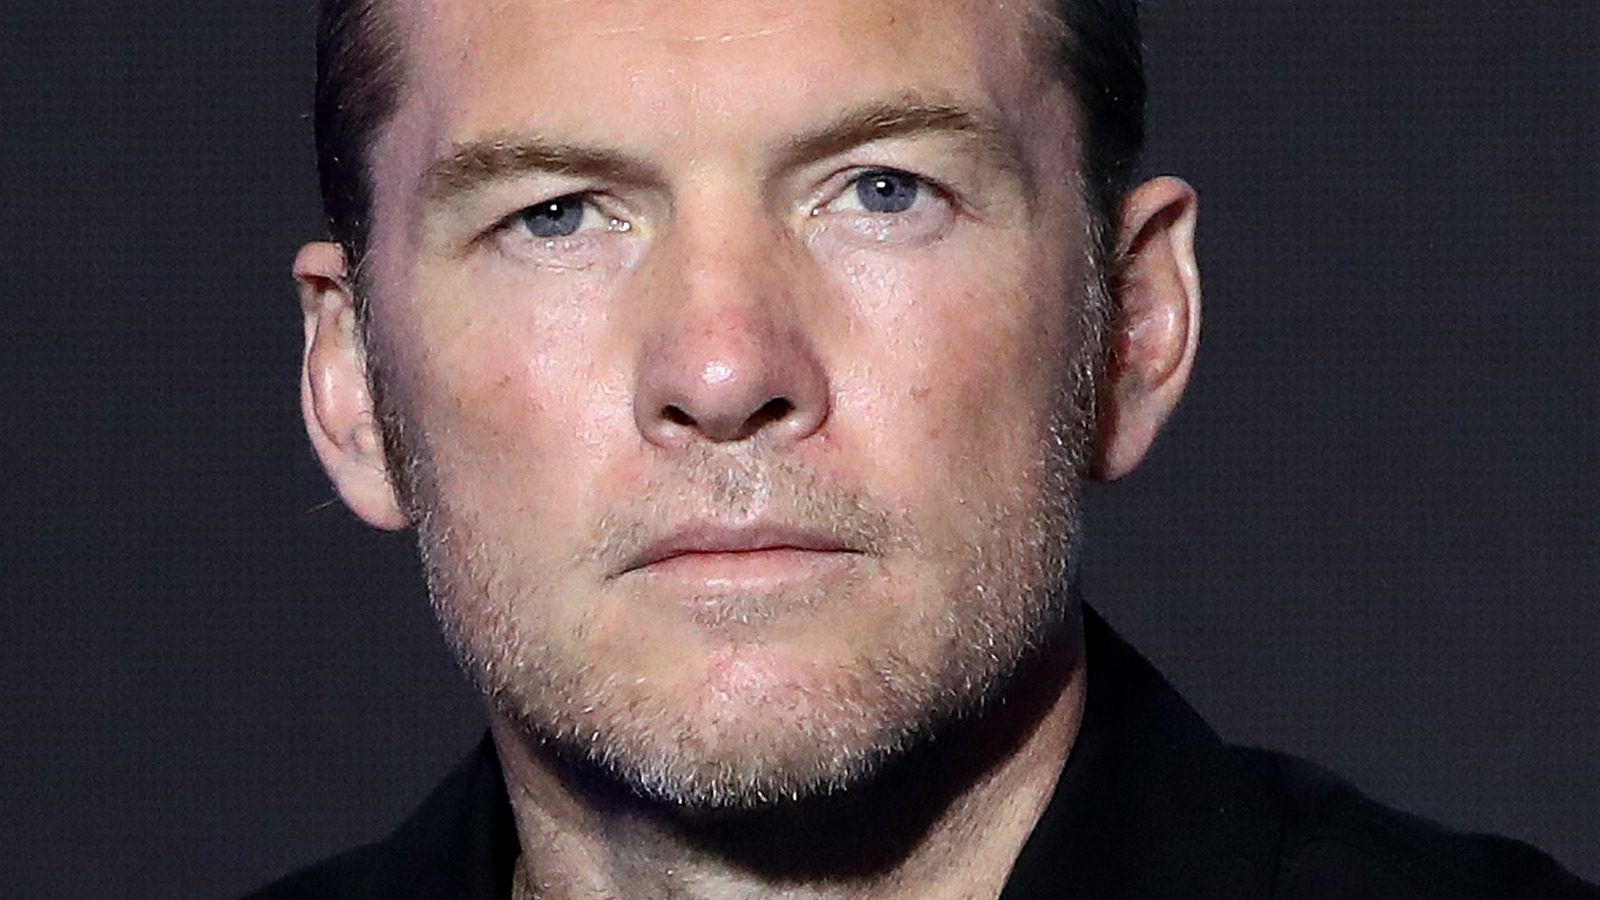 The Way Of Water's Sam Worthington Offers His Own Take On The Unsettling Underwater Training